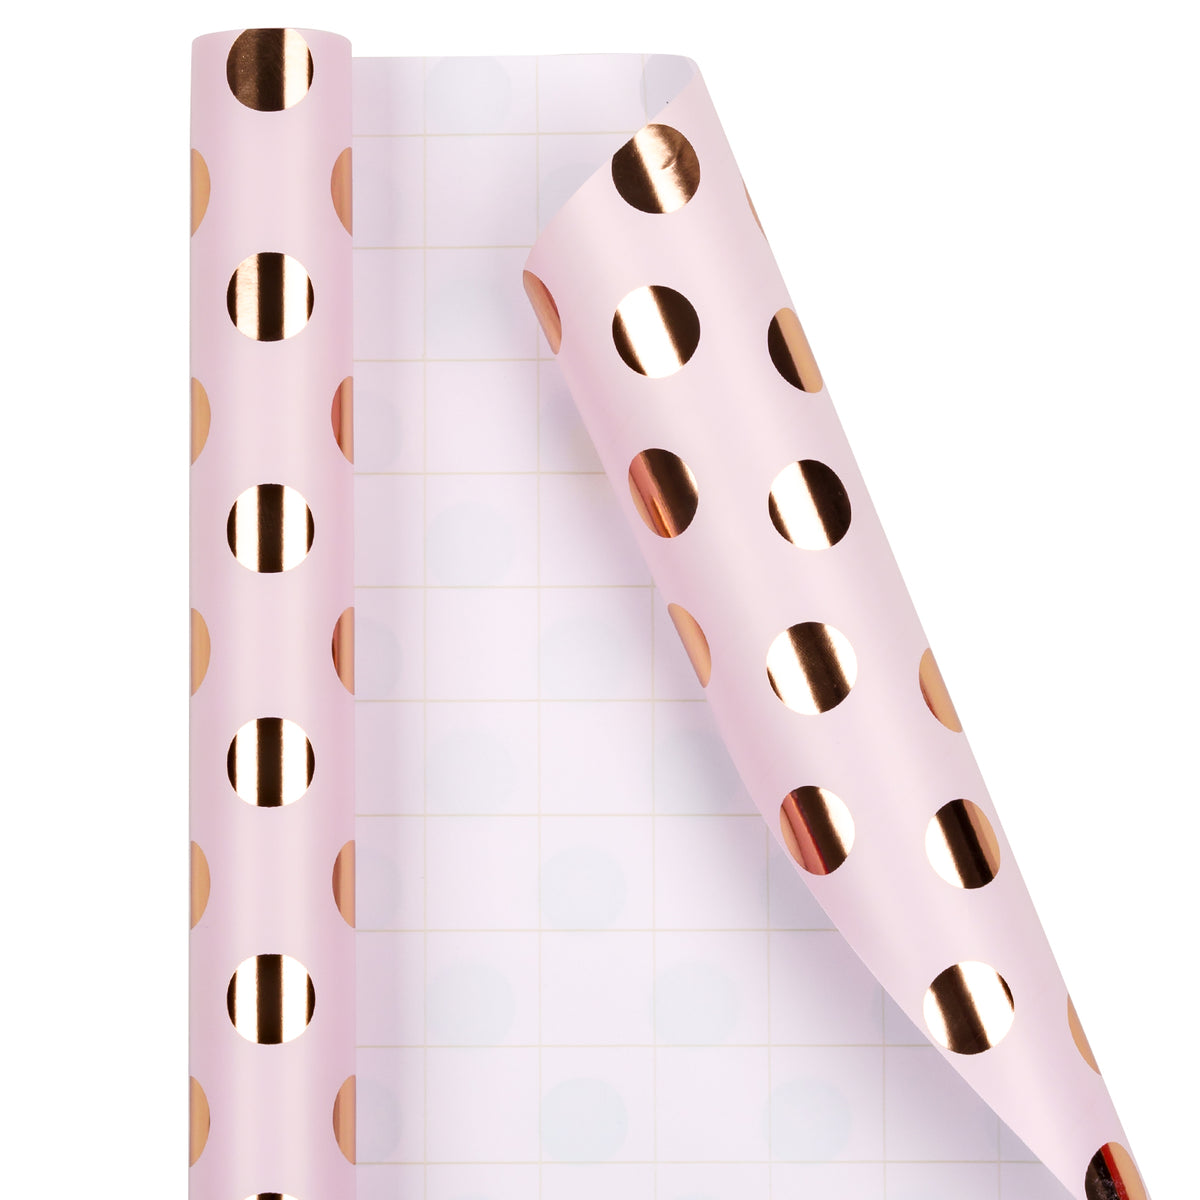 Rose Dot Wrapping Paper